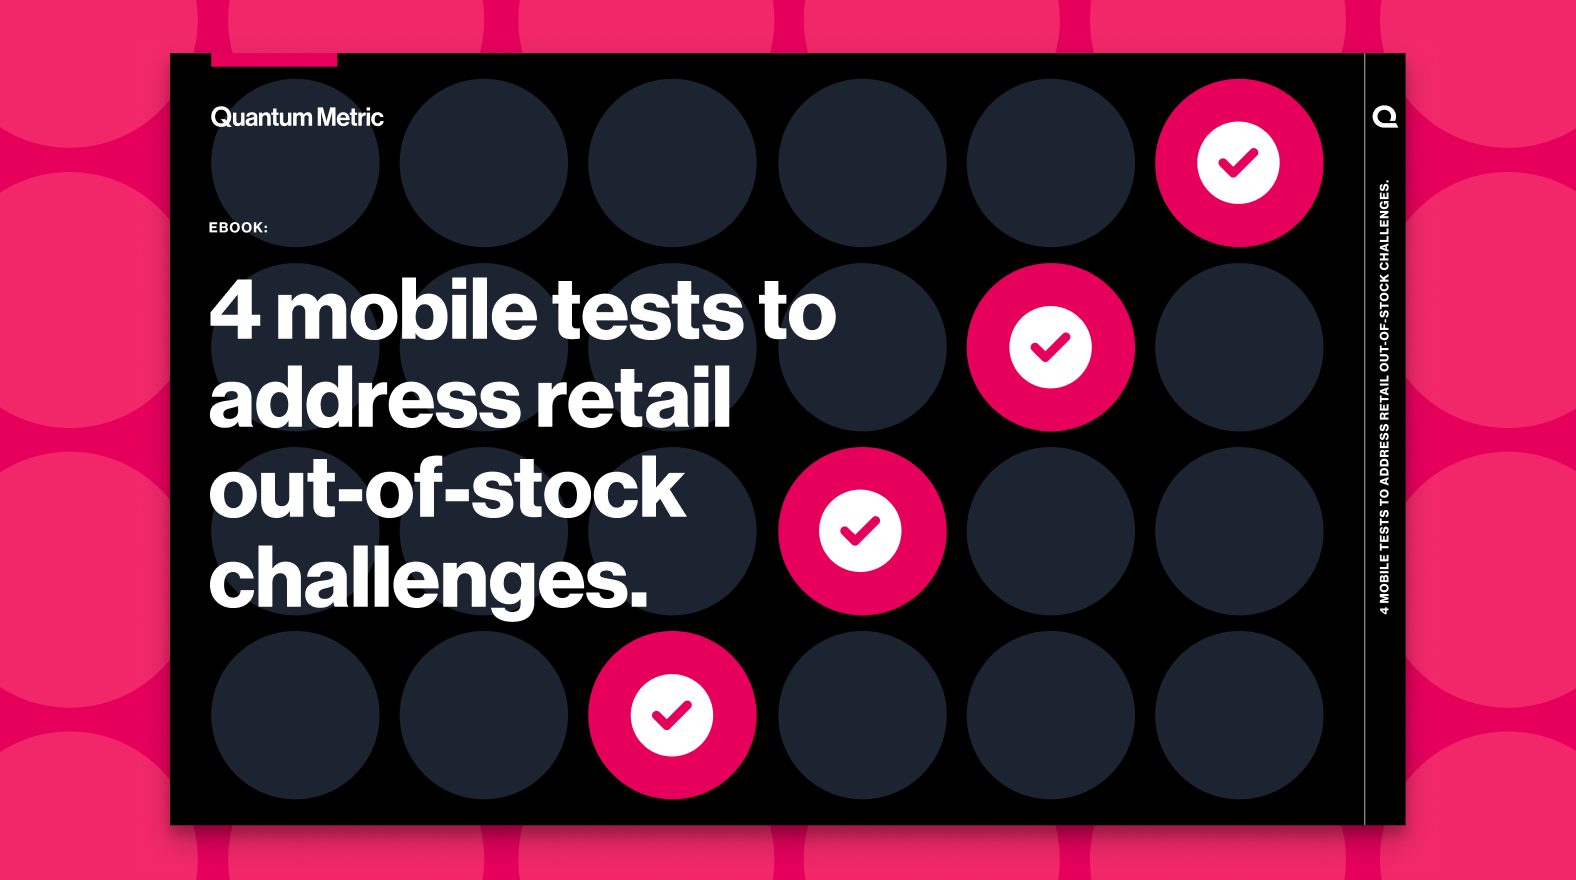 4 mobile tests to address retail out-of-stock challenges